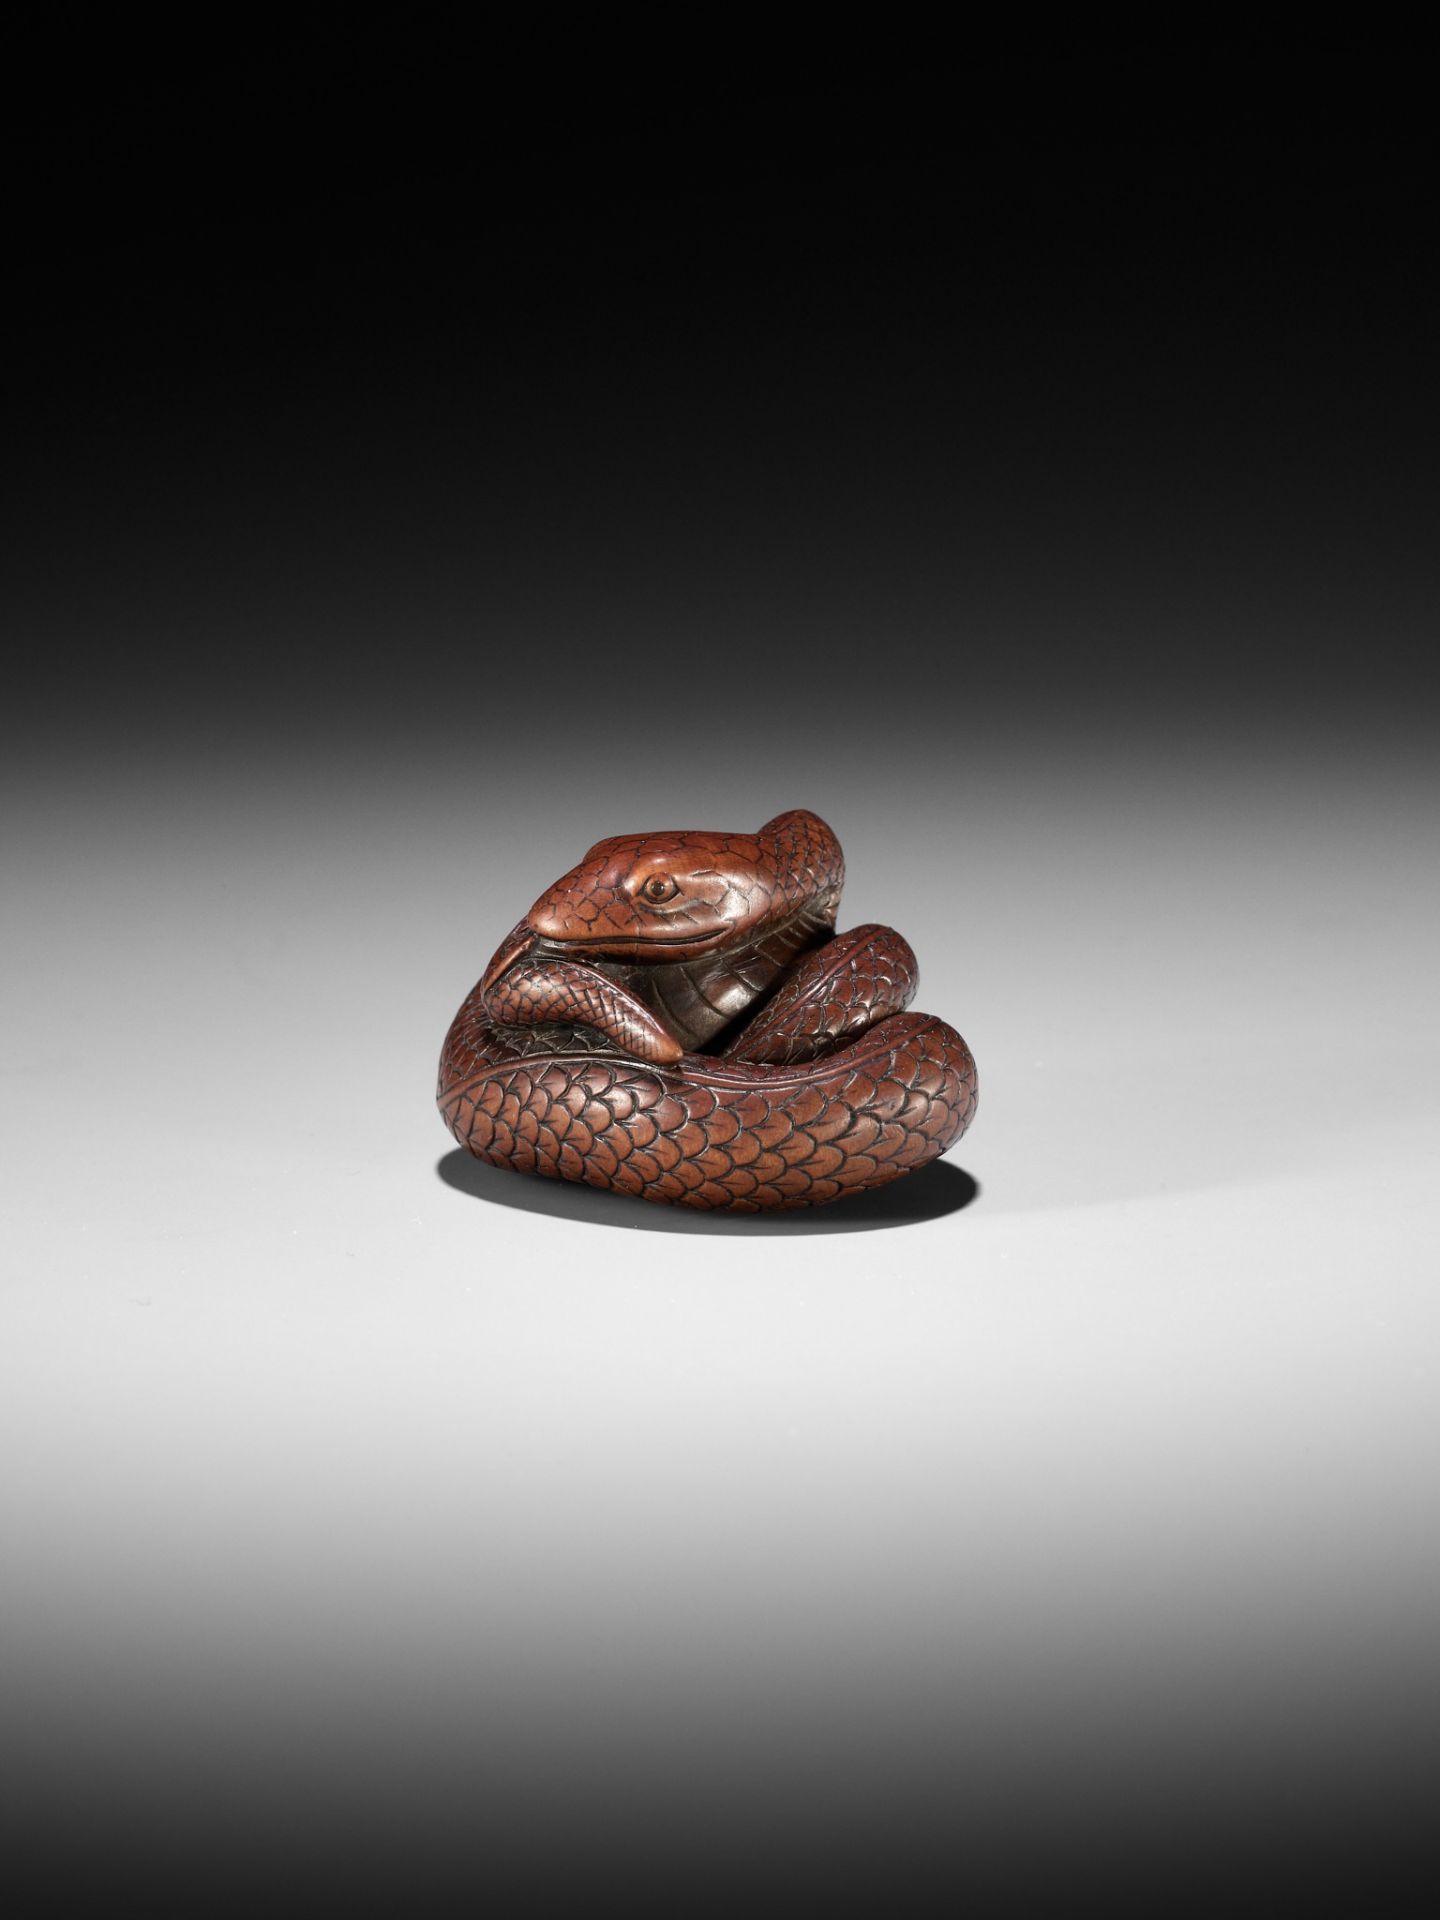 AN EXCEPTIONAL AND LARGE WOOD NETSUKE OF A SNAKE, ATTRIBUTED TO OKATOMO - Image 15 of 19